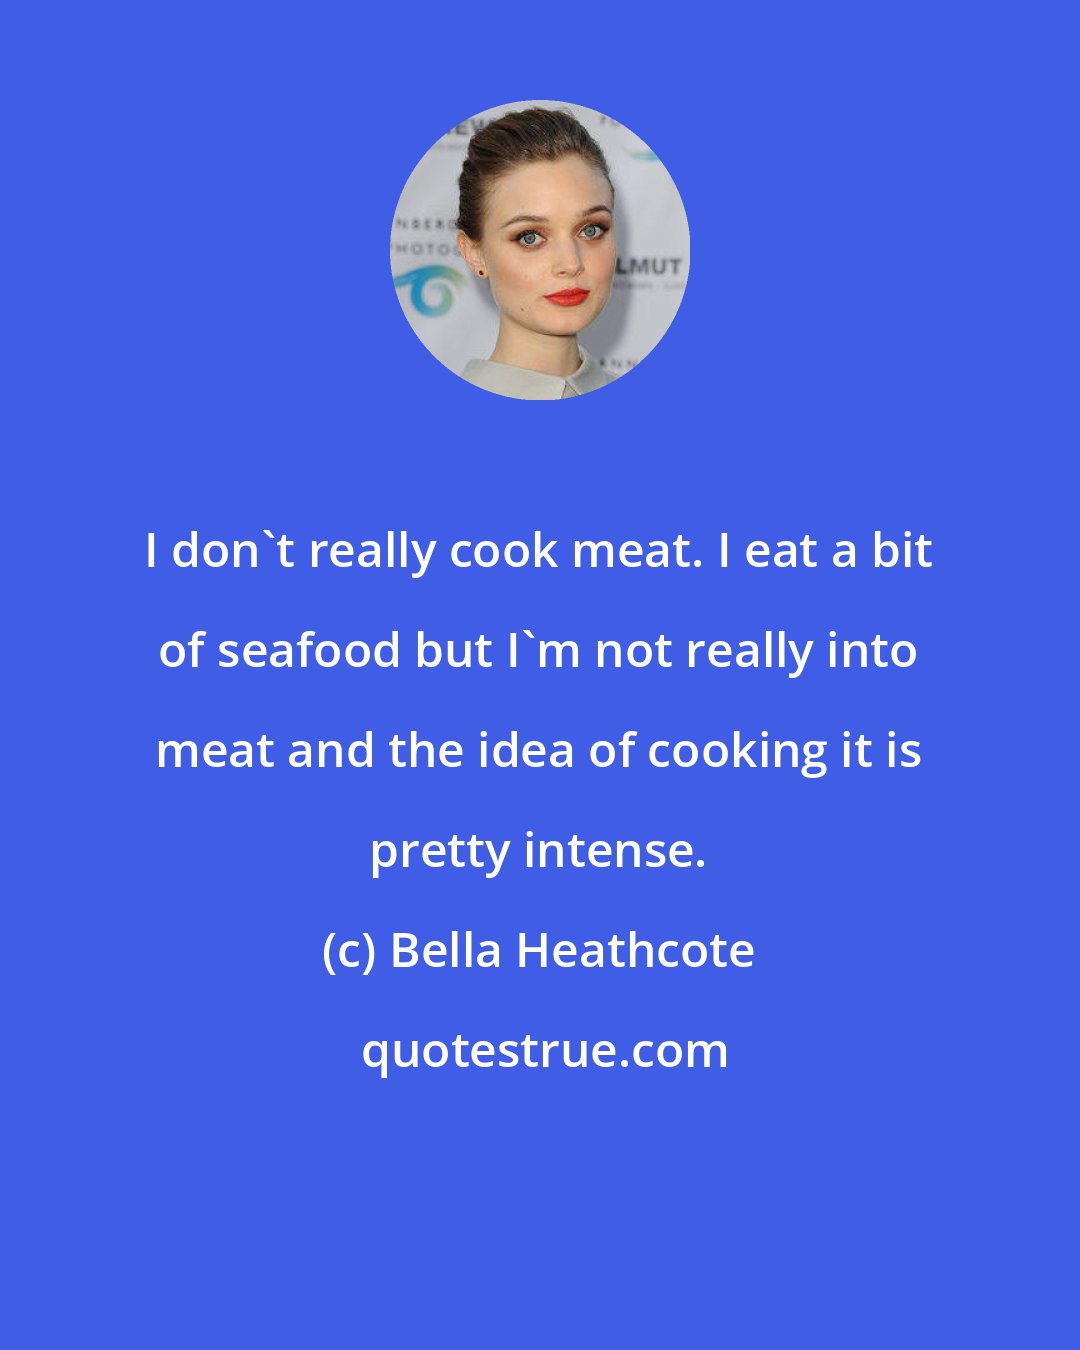 Bella Heathcote: I don't really cook meat. I eat a bit of seafood but I'm not really into meat and the idea of cooking it is pretty intense.